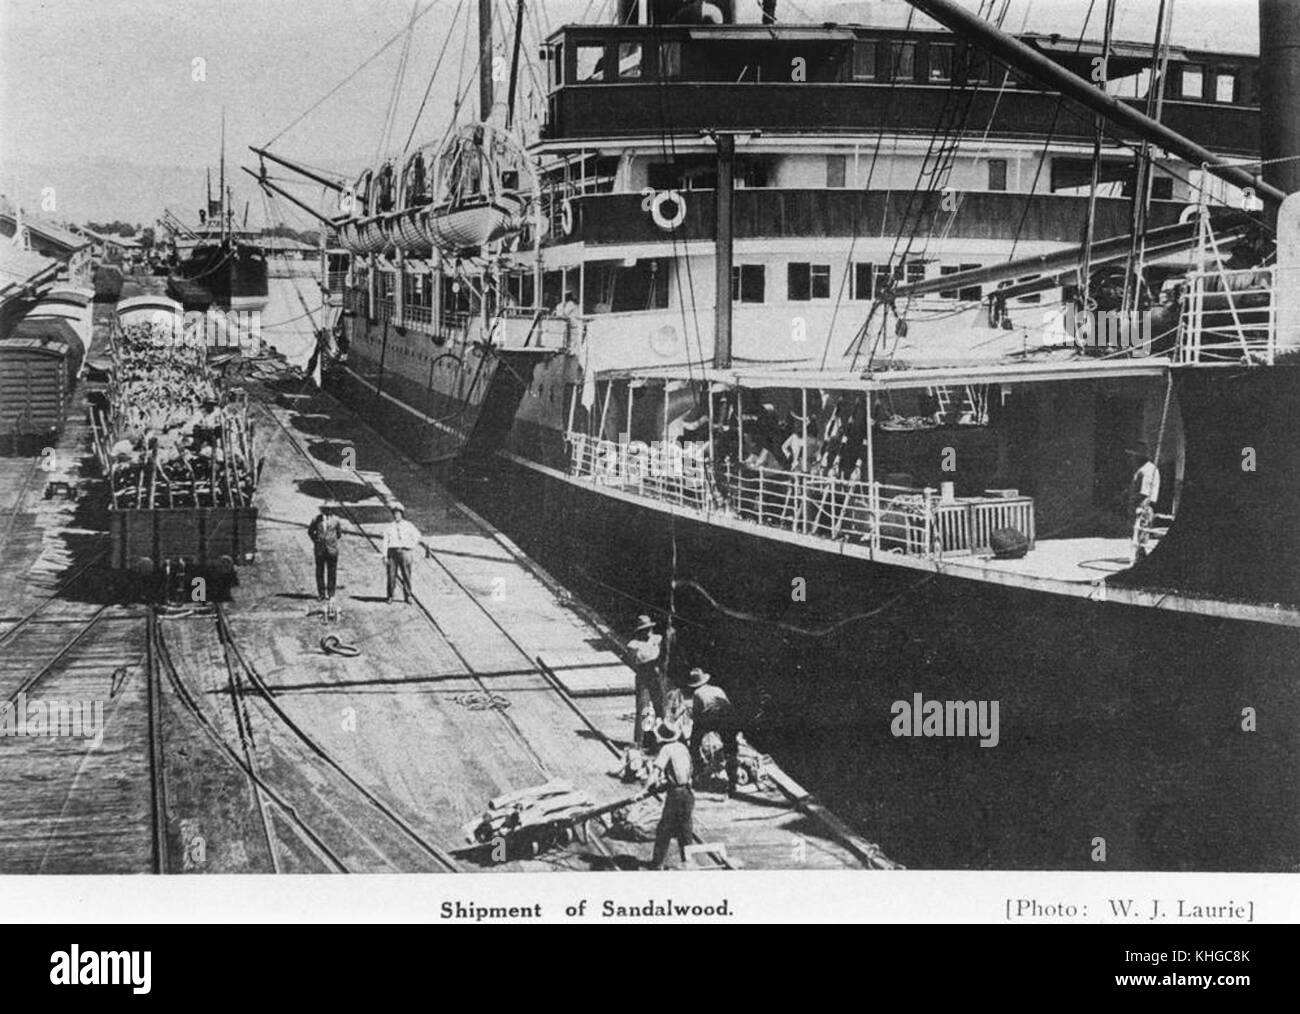 1 297471 Shipment of sandalwood at a wharf in Townsville, 1929 Stock Photo